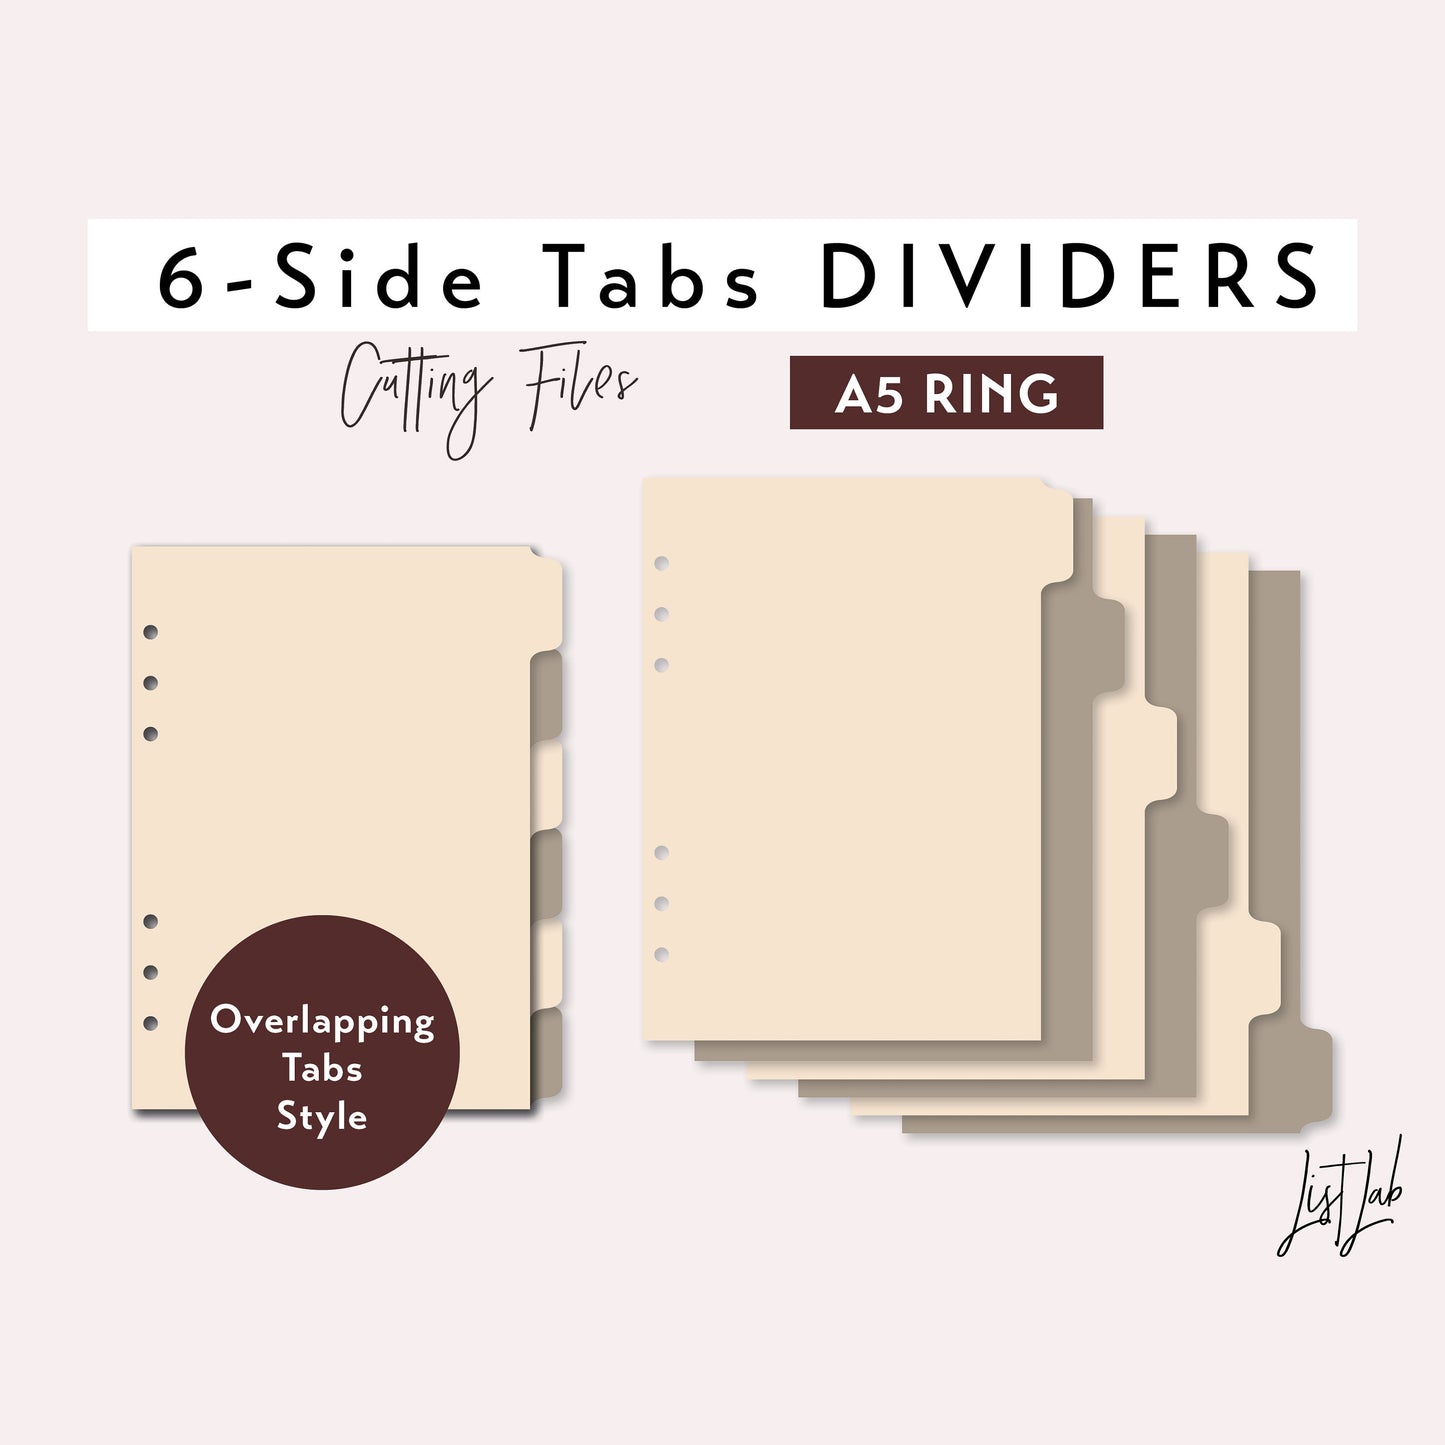 A5 Ring 6-SIDE Tab Dividers Cutting Files Set